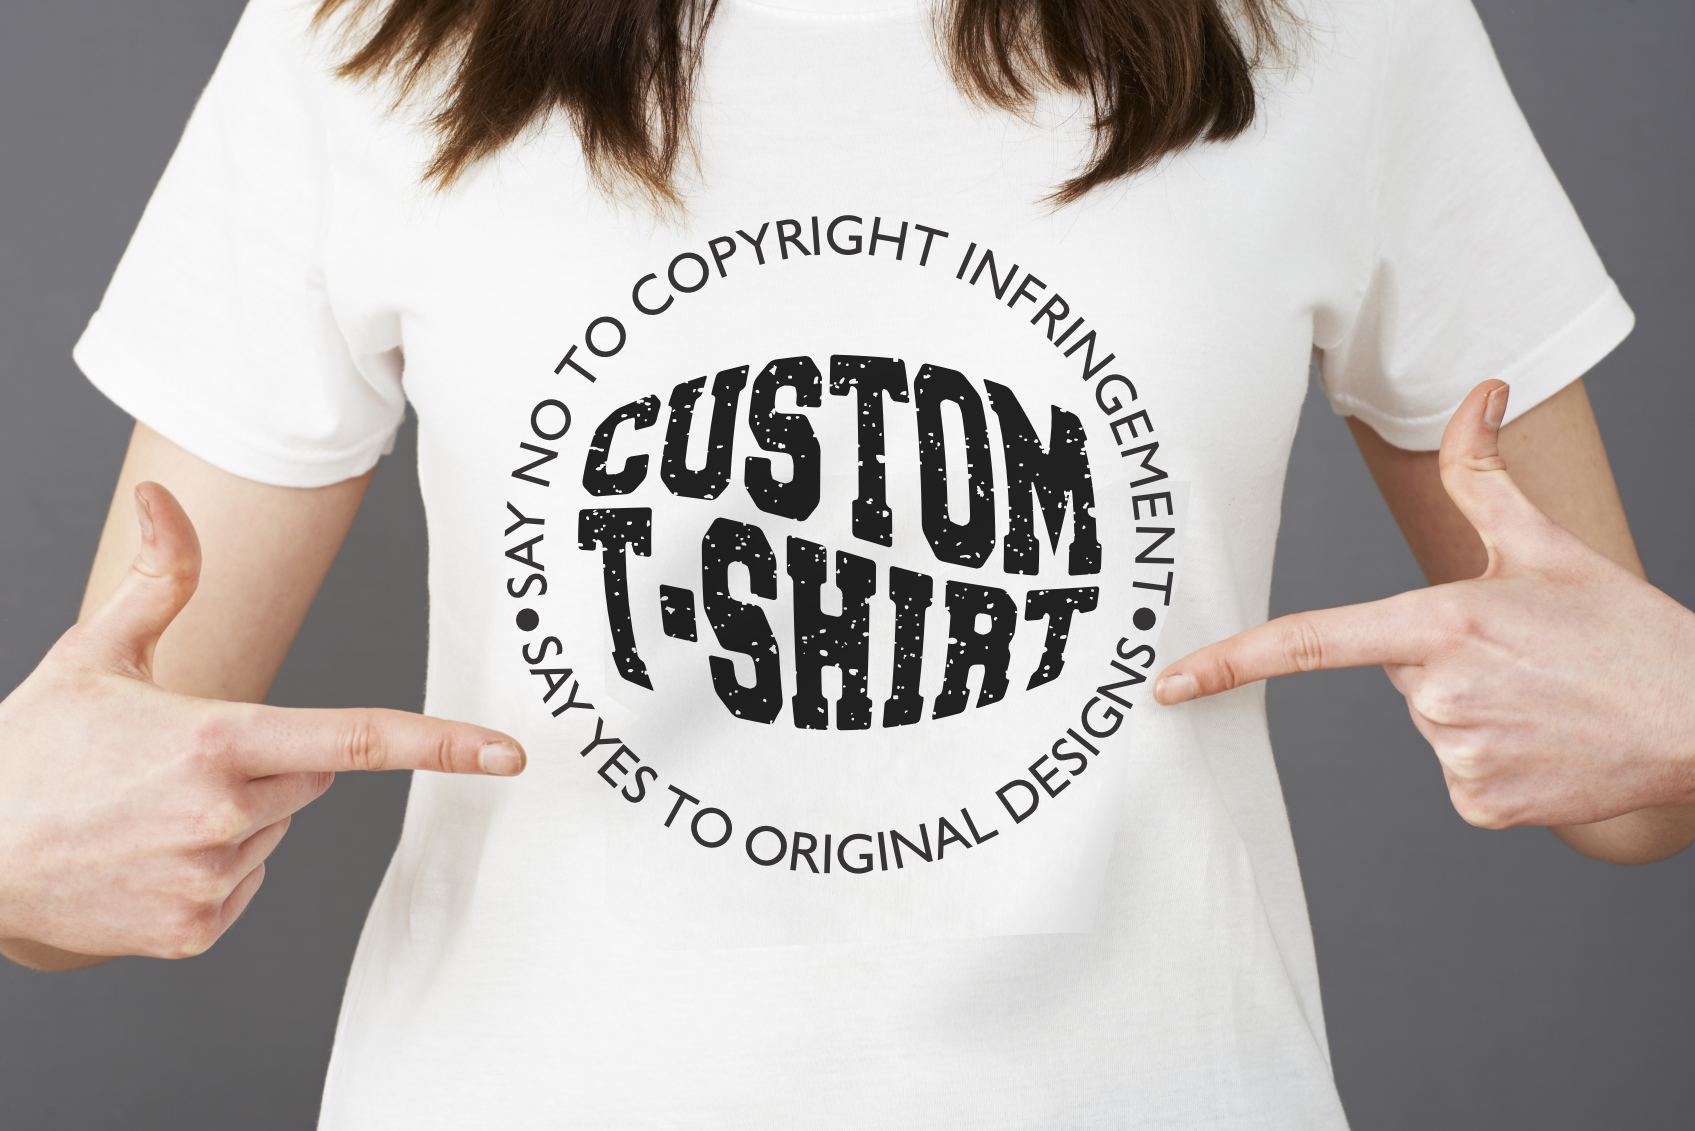 Girl with custom tshirt that says 'Say no to copyrigt infringement, Say yes to custom designs'